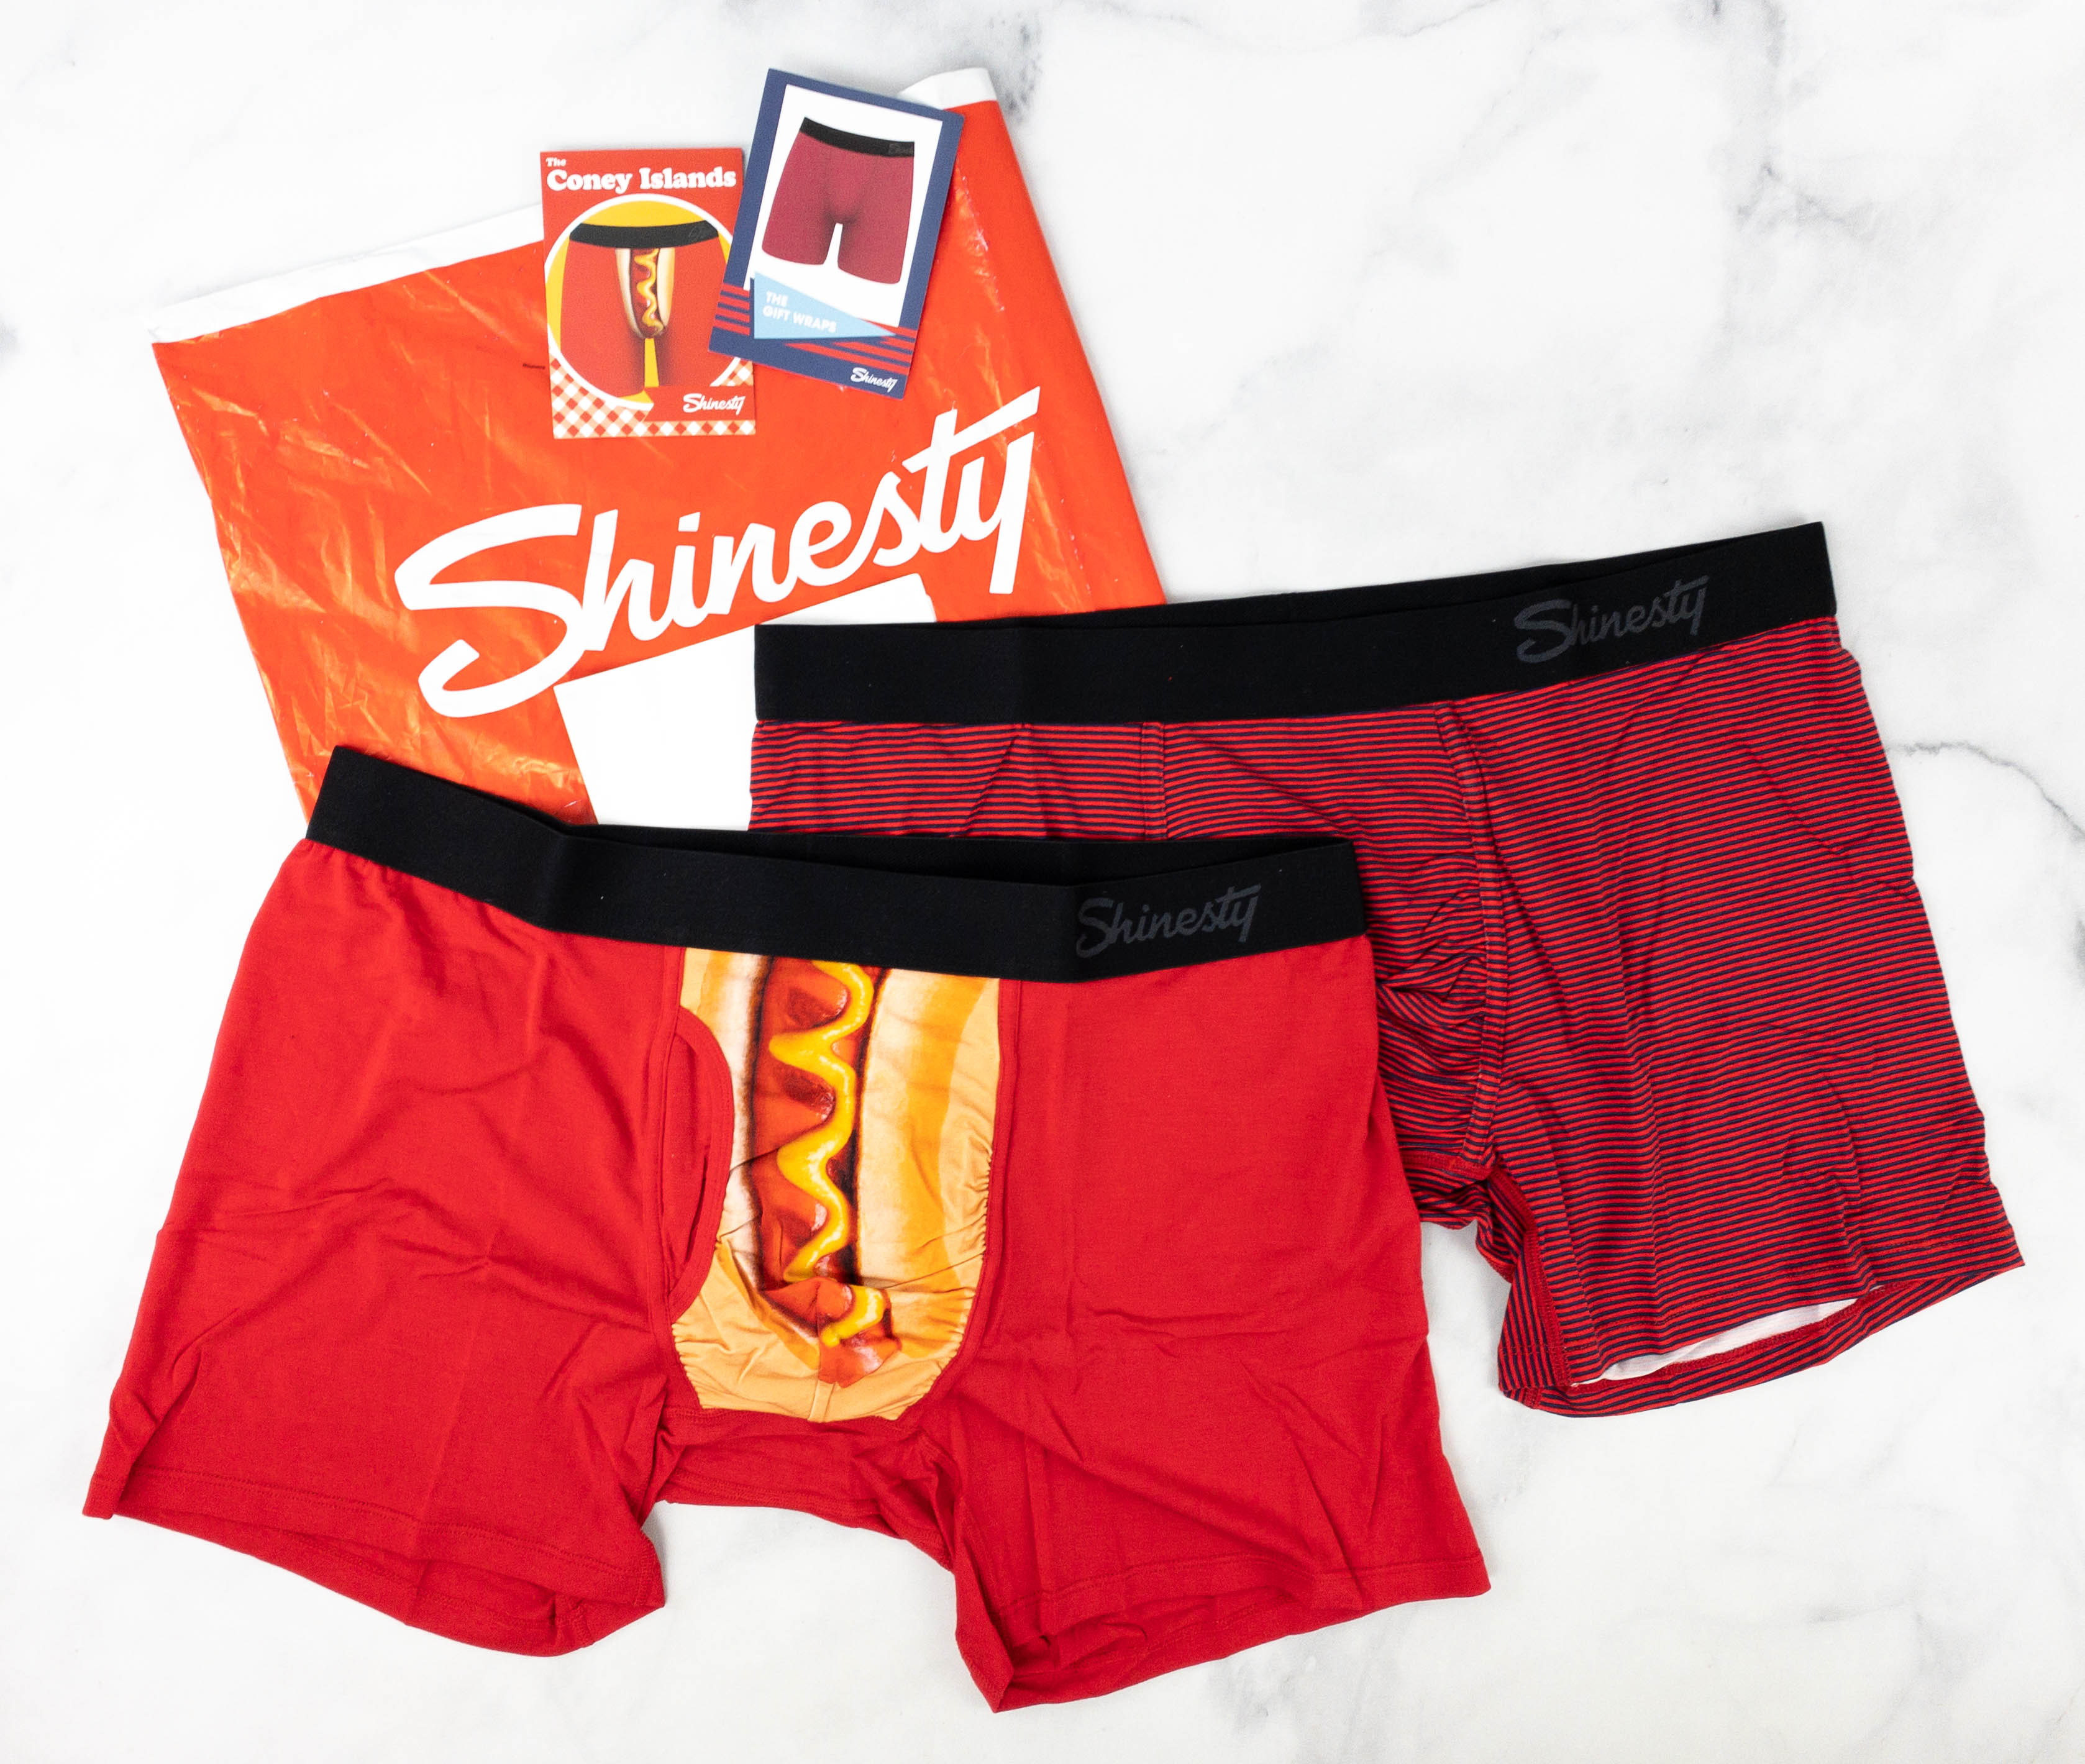 Shinesty Coupon Get 10 Off First Undies Order! Hello Subscription